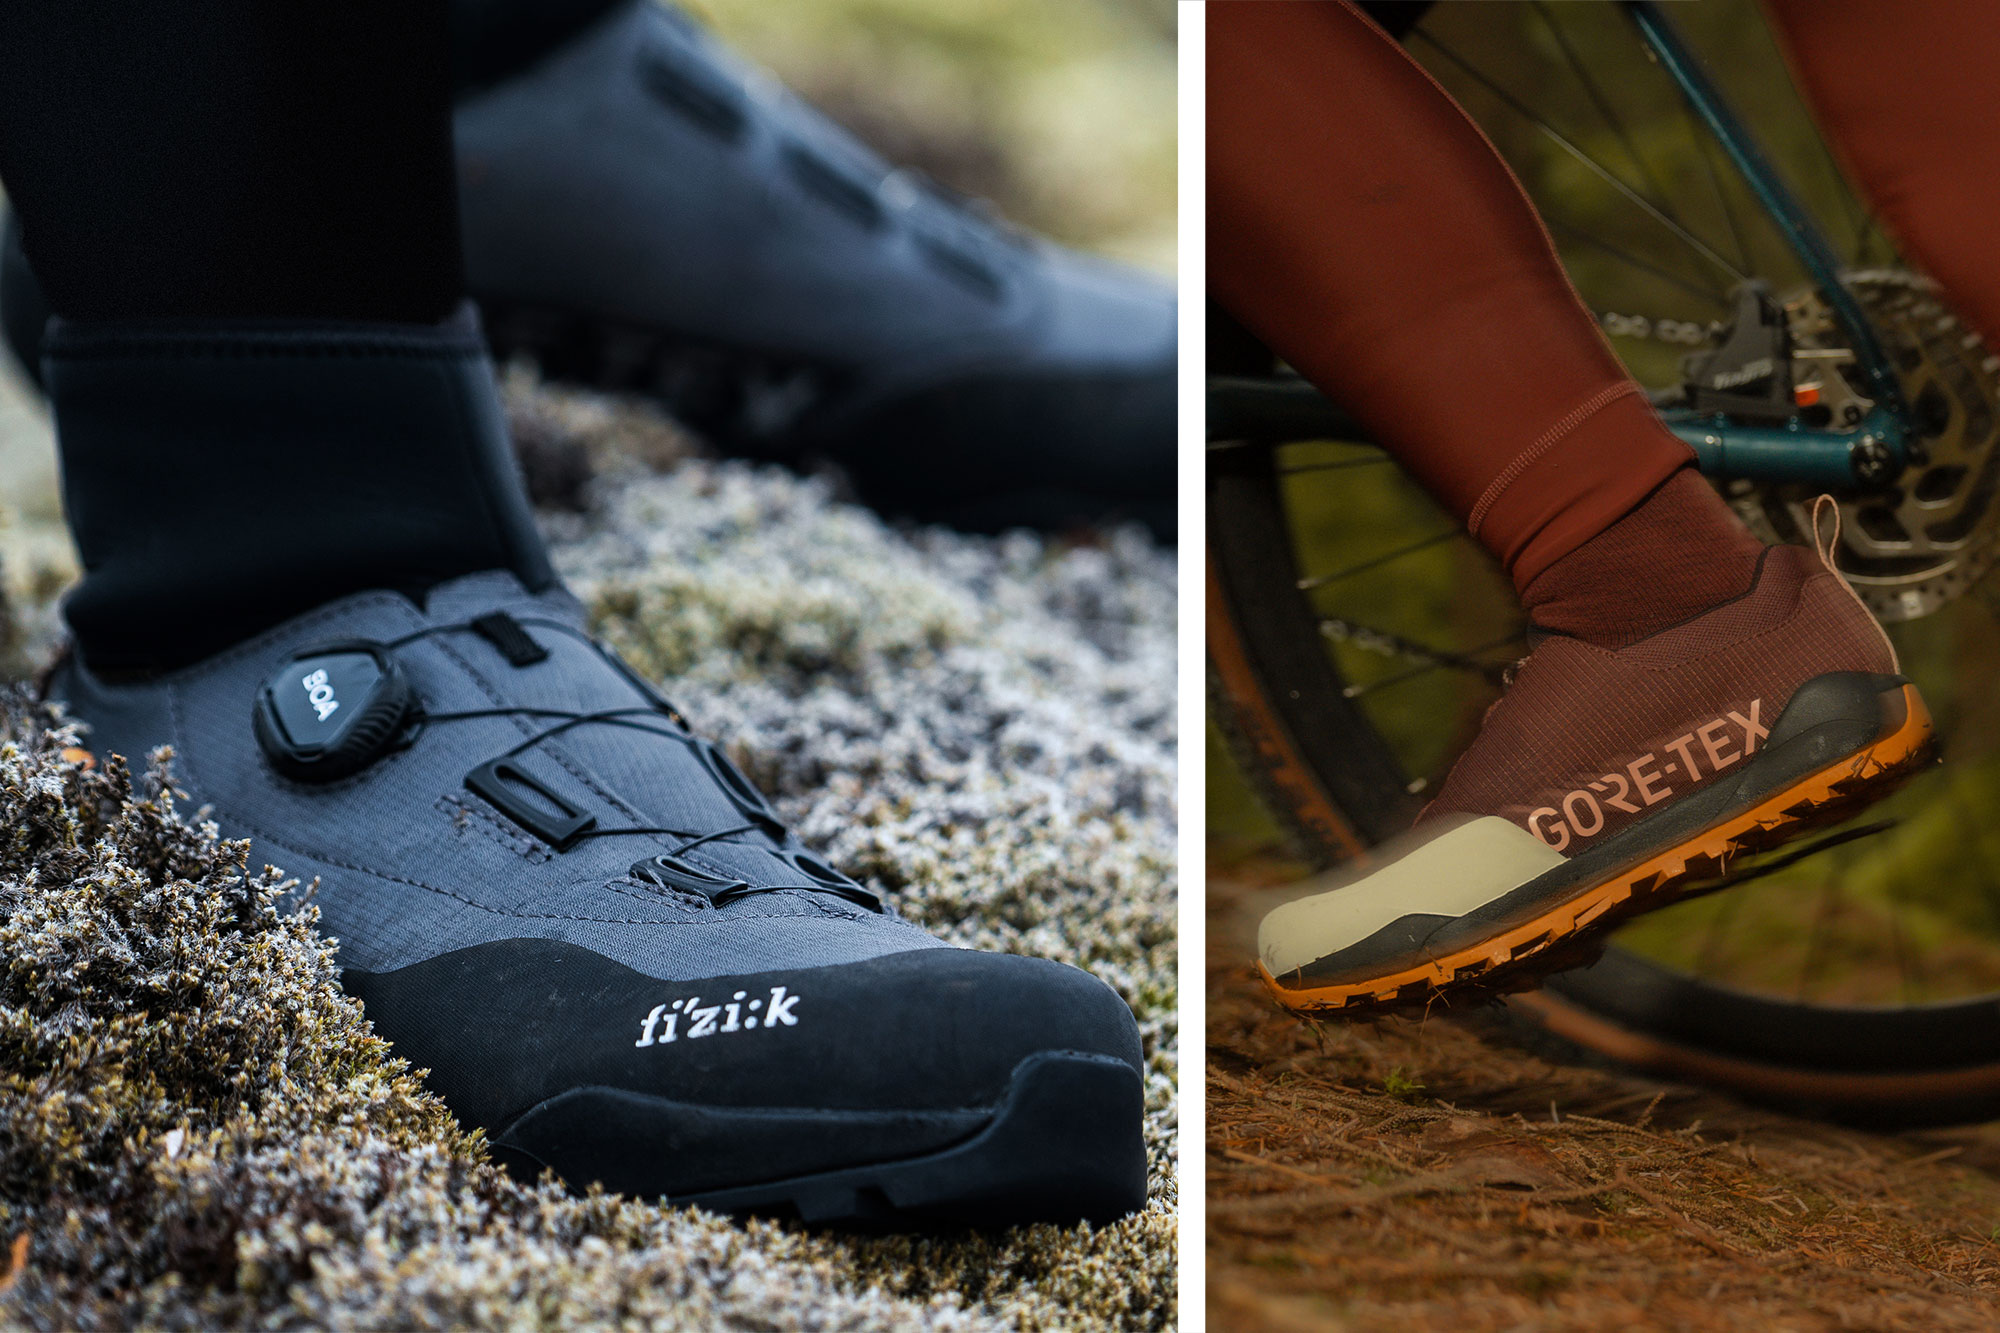 Fizik Nanug GTX insulated and Ergolace PEdALED waterproof Gore-Tex MTB boots, mountain bike and gravel shoes